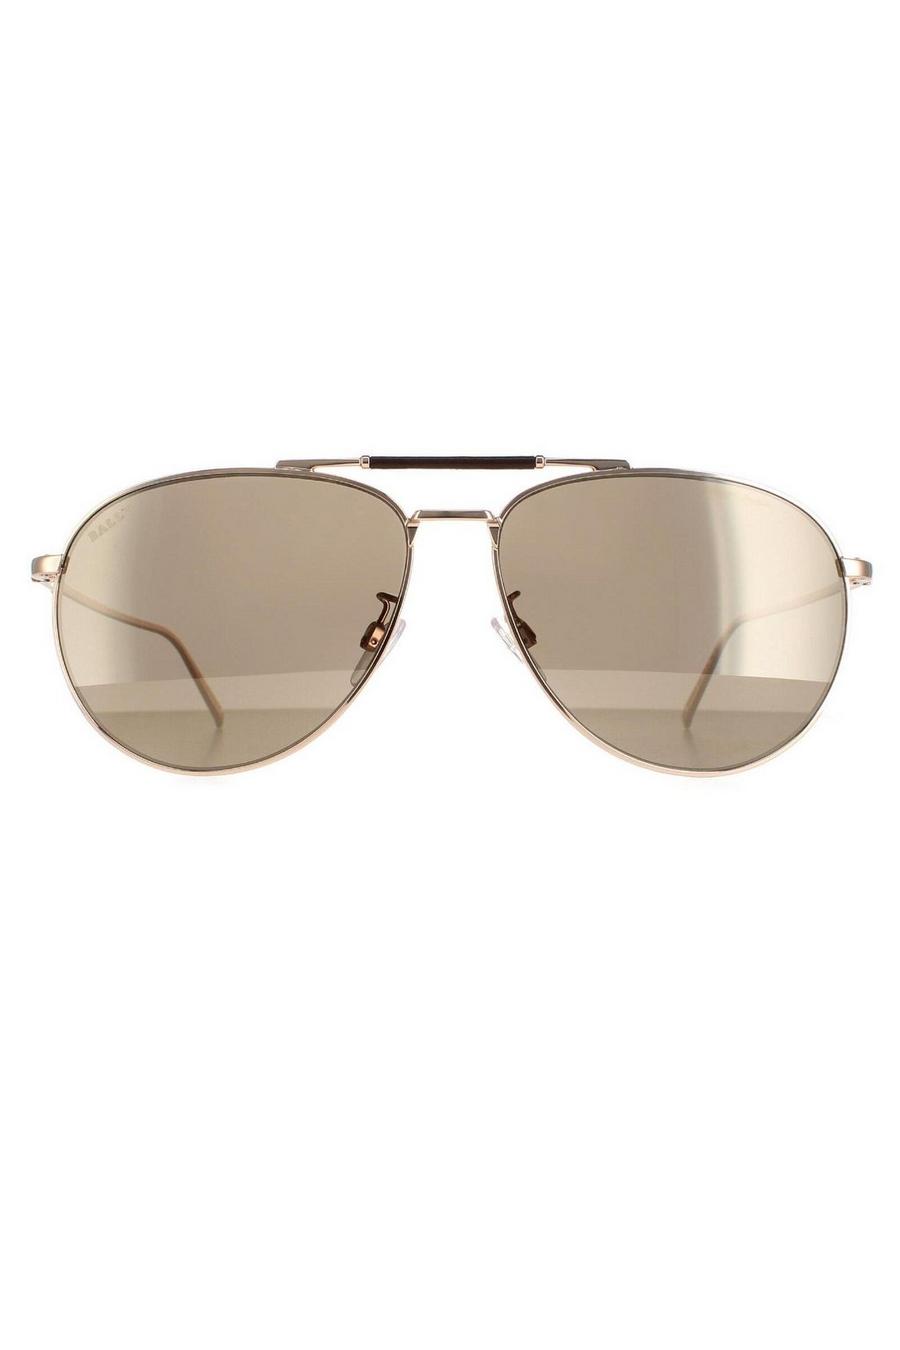 Brown Aviator Cooper  Gold Mirrored  BY0038-D